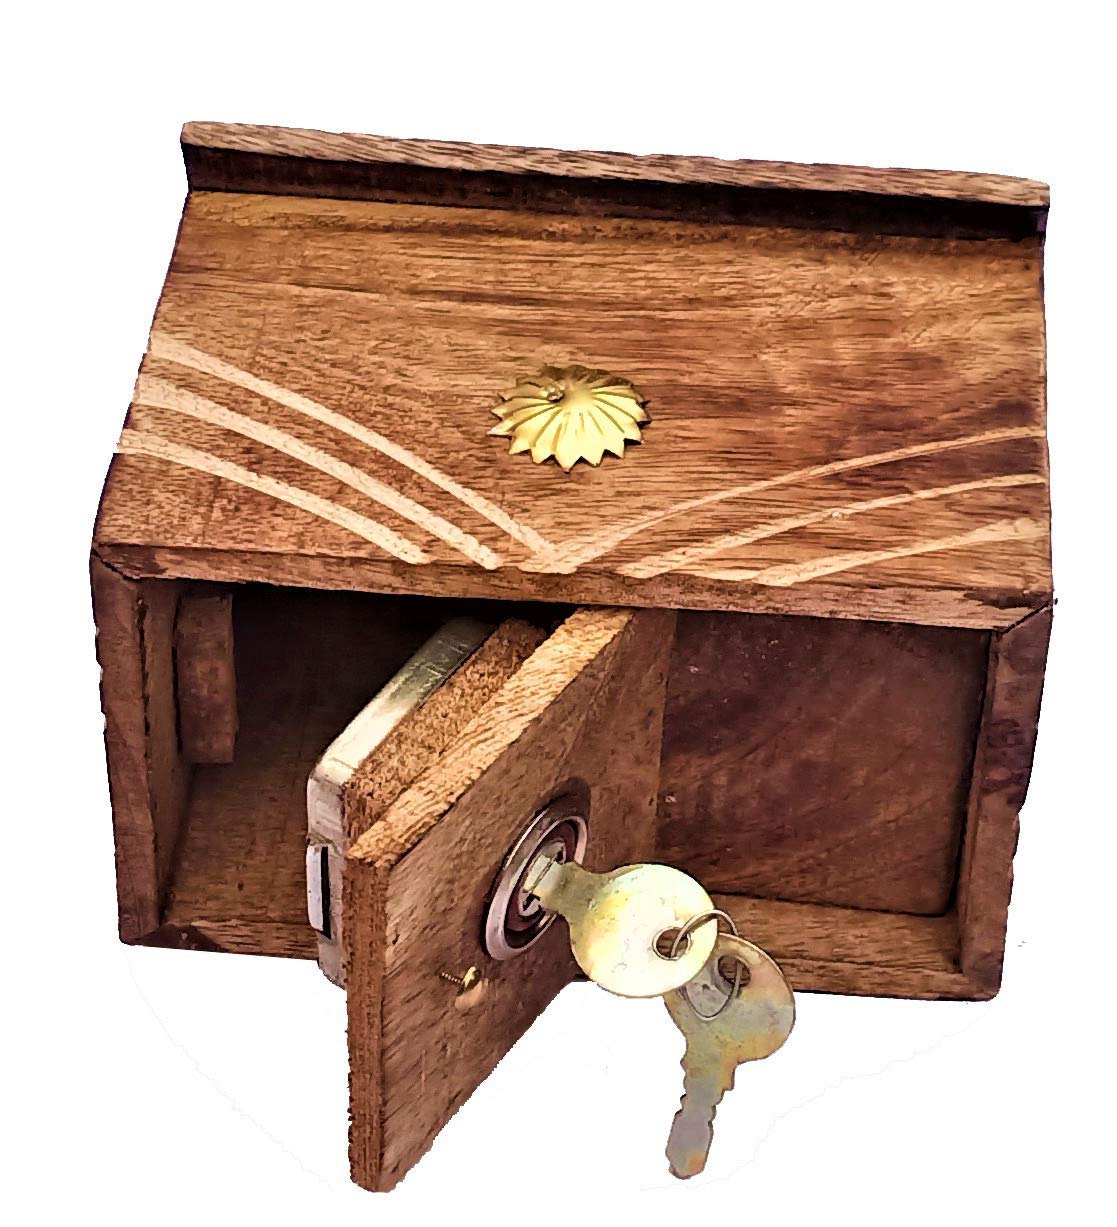 Wooden Hut Shaped Money Bank for Coin Storage Organizer for Kids & Adults , Gullak for Gift Item Dime Store